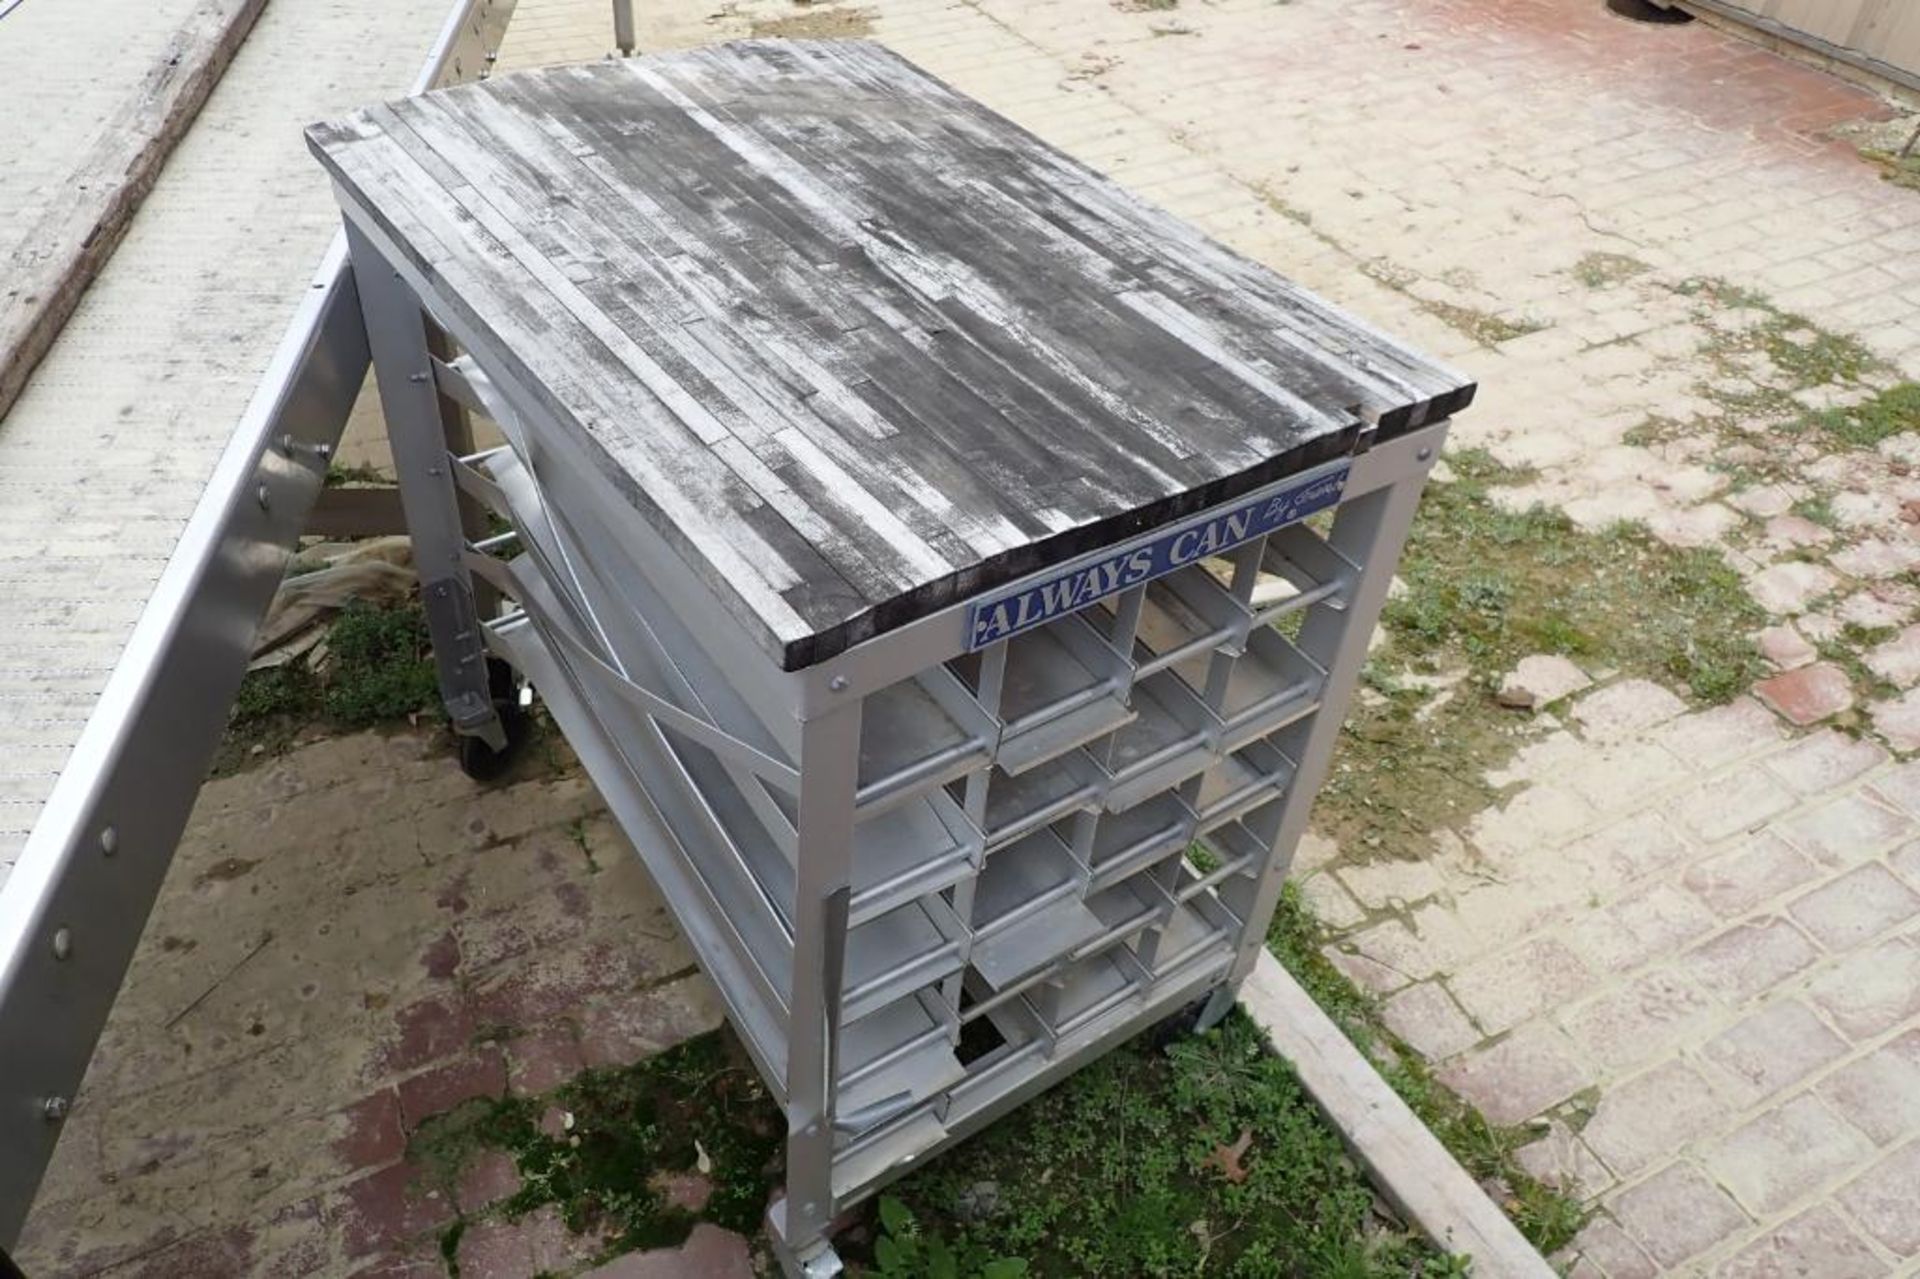 Always can, aluminum can storage cart. {Located in Dixon, IL} - Image 4 of 4